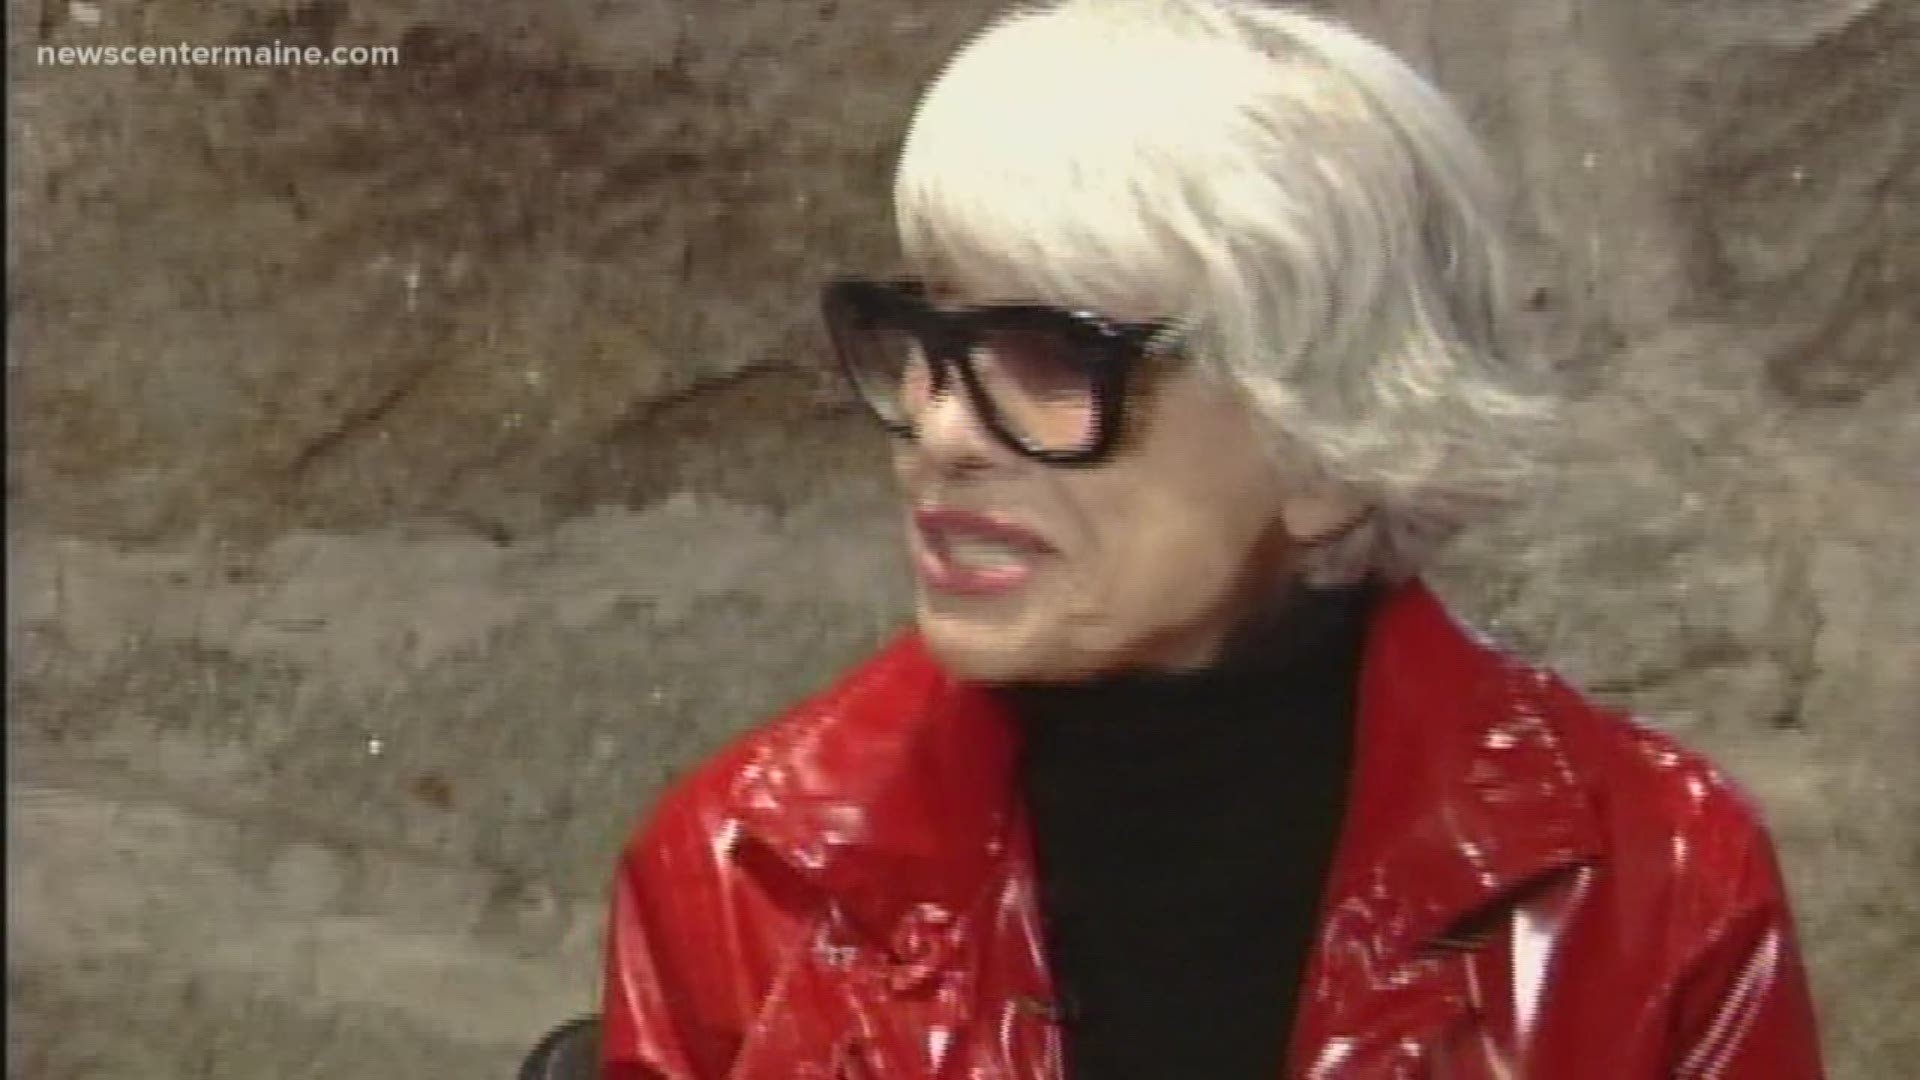 Carol Channing passed away on 1.15.2019. She was 97 years old. We spoke with her when she was 86. Still full of life, she talked about her long career.